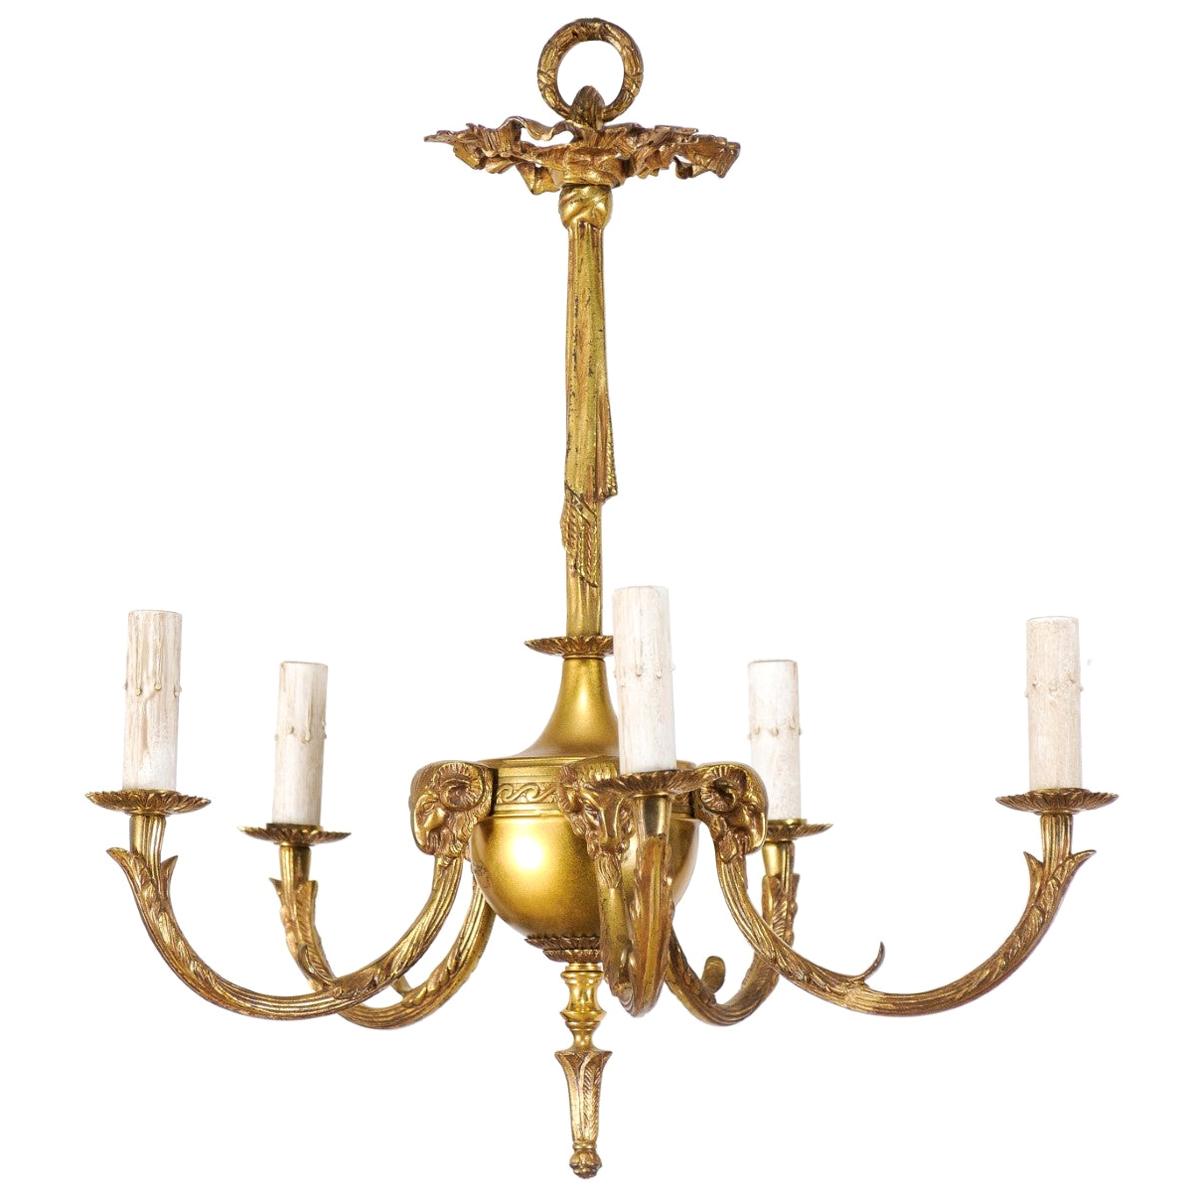 Mid-20th Century French Brass Five-Light Chandelier with Ram's Head Accents